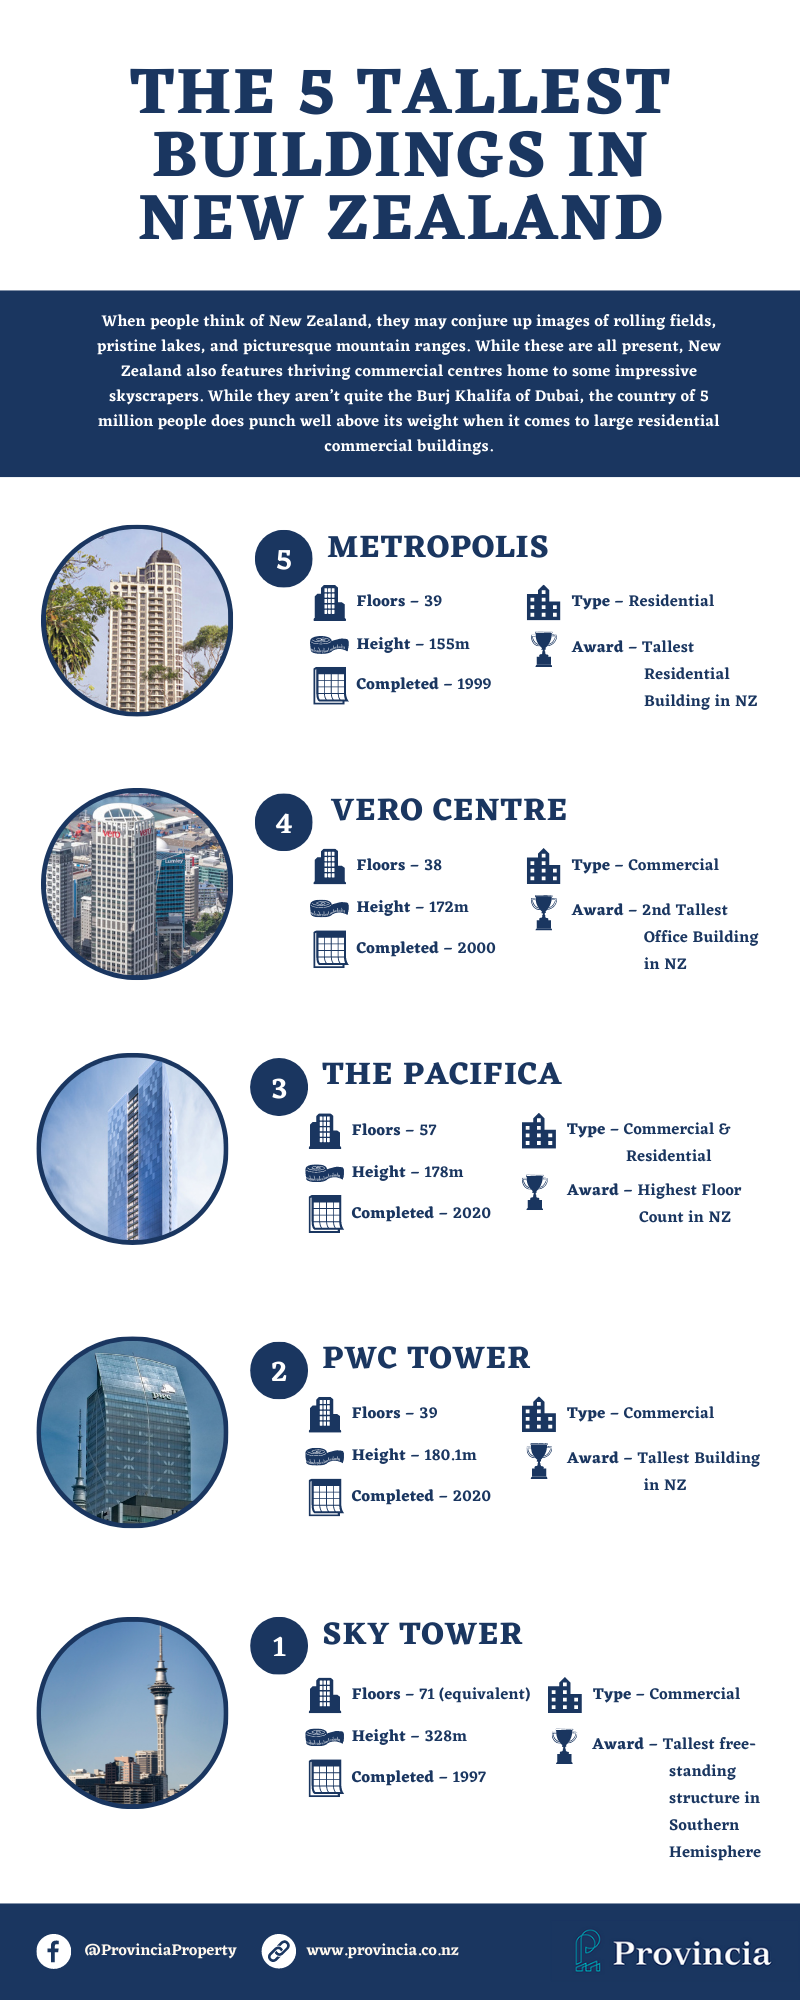 The 5 Tallest Buildings in New Zealand